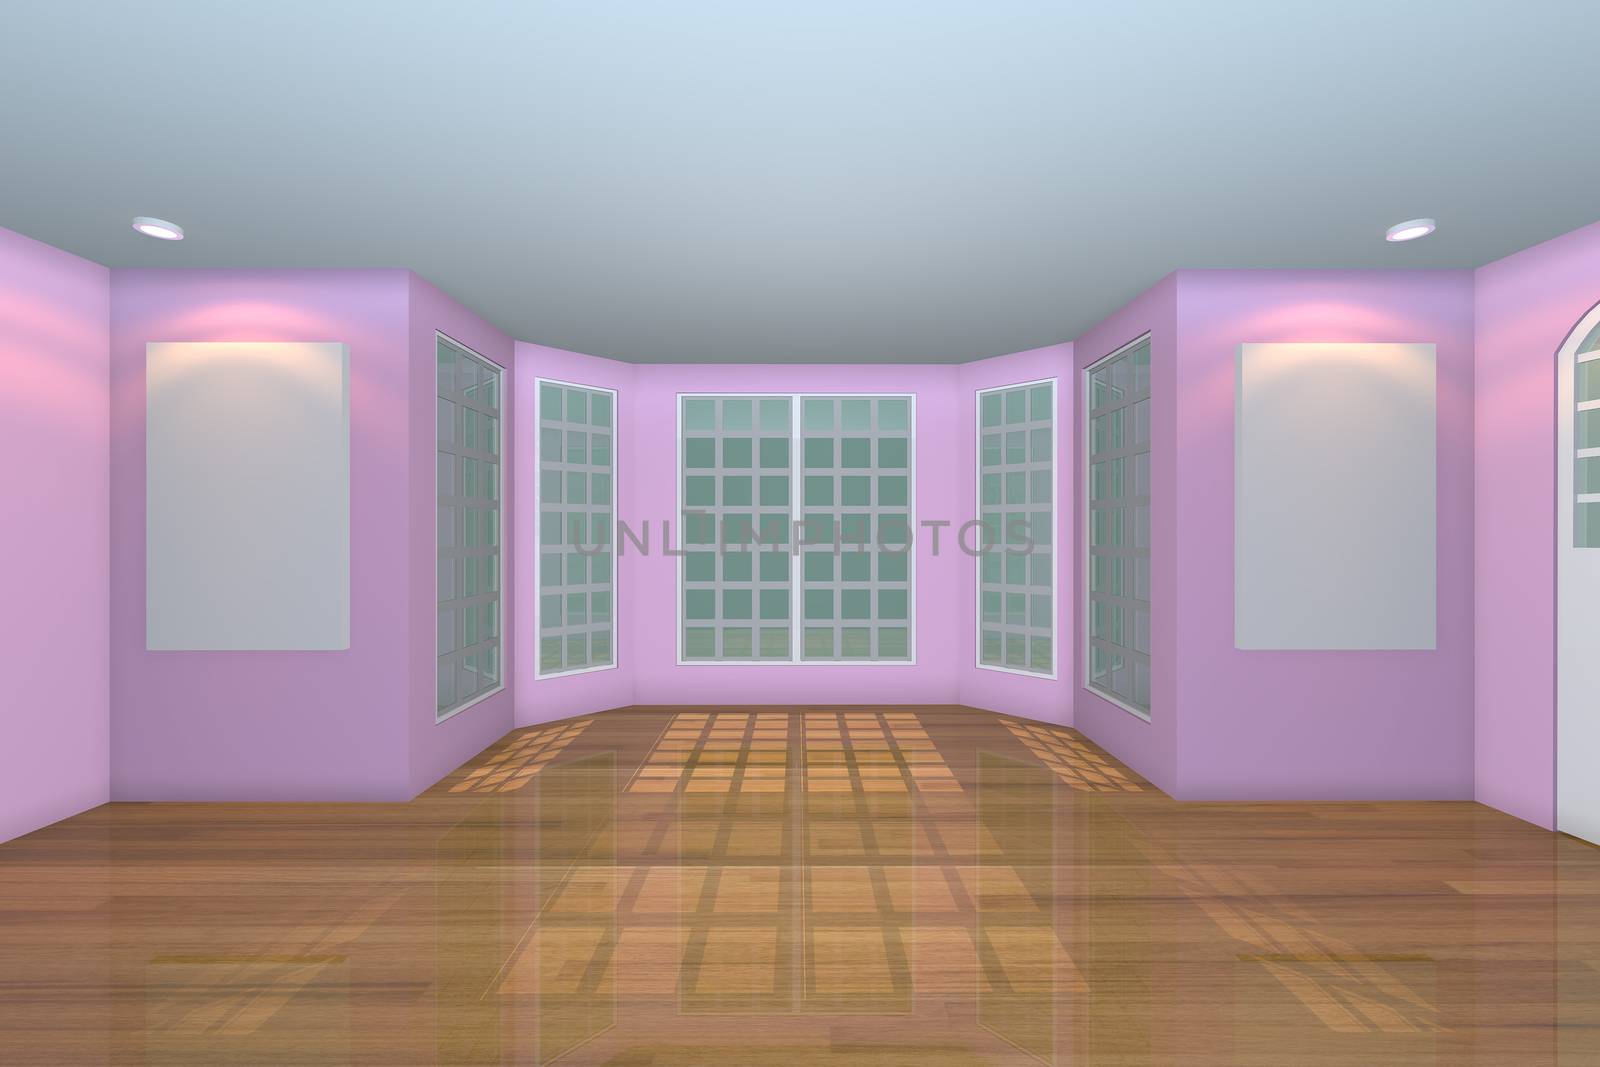 Home interior rendering with empty room color pink wall and decorated with wooden floors.